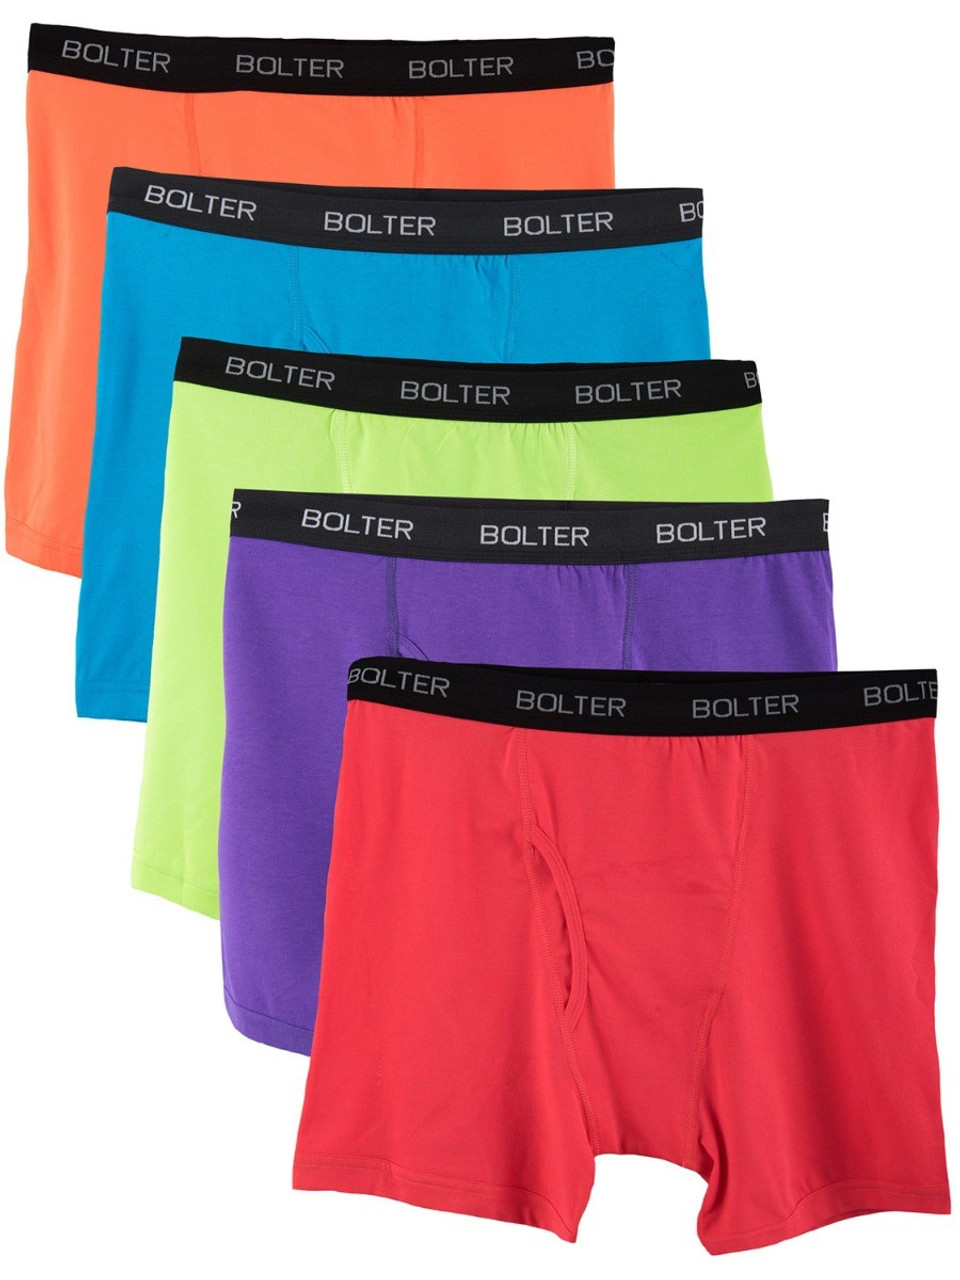 Variety Boys Boxer Brief Size 6/8 Multicolor 5 pack Comfort Stretch NWOT